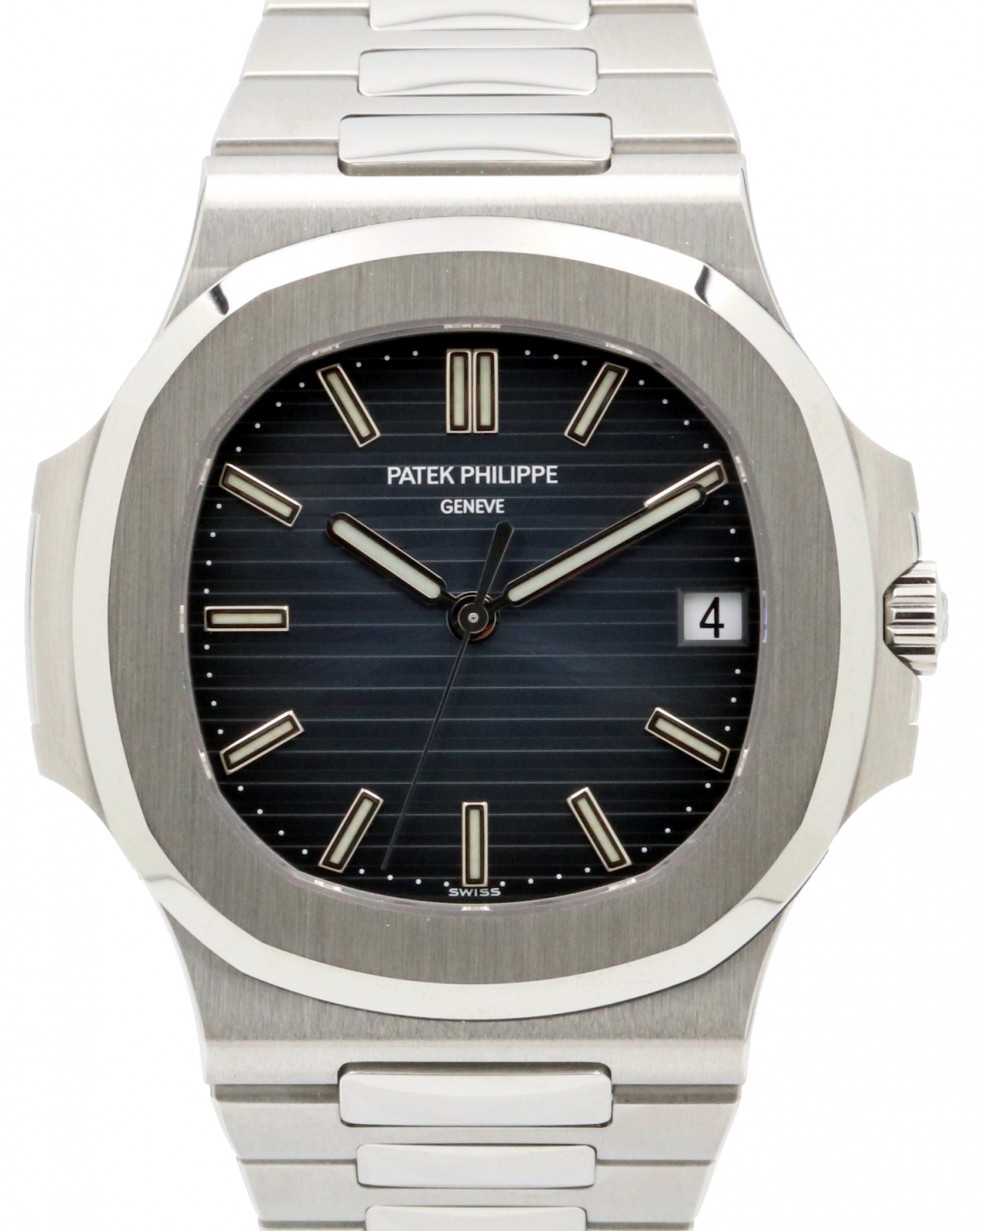 Patek Philippe Nautilus Date Sweep Seconds Stainless Steel Black Blue Dial  5711/1A-010 - BRAND NEW